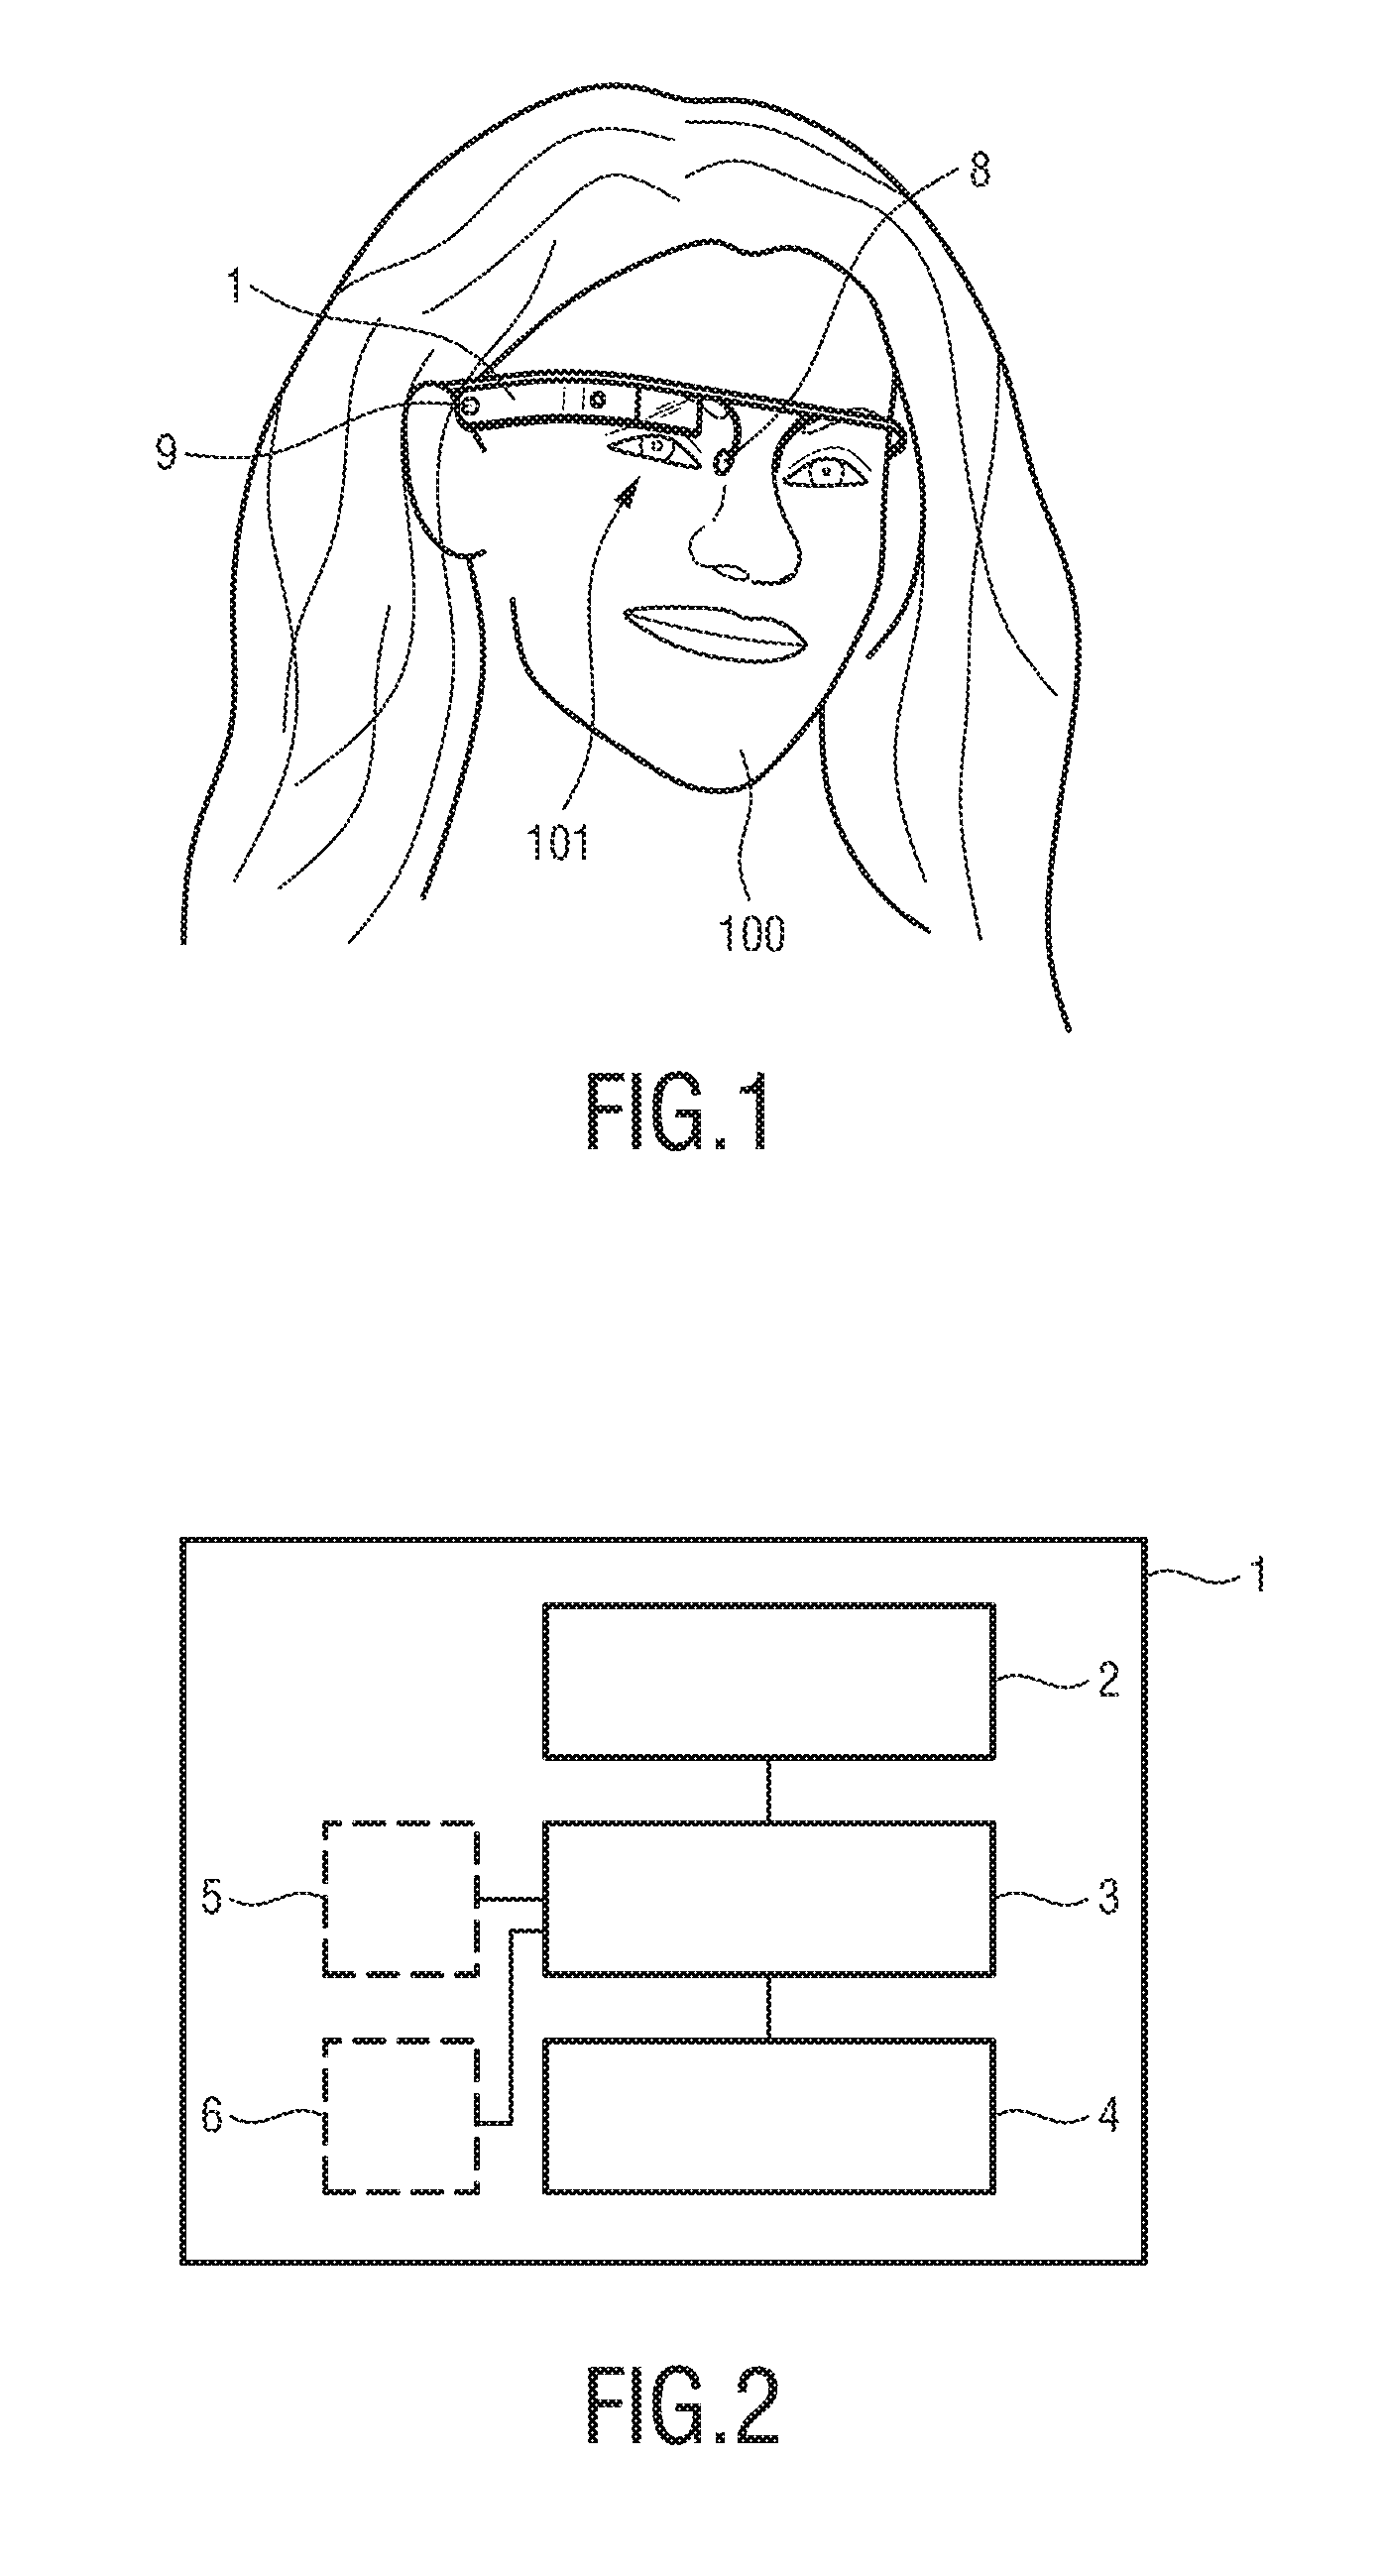 System for monitoring a dopaminergic activity